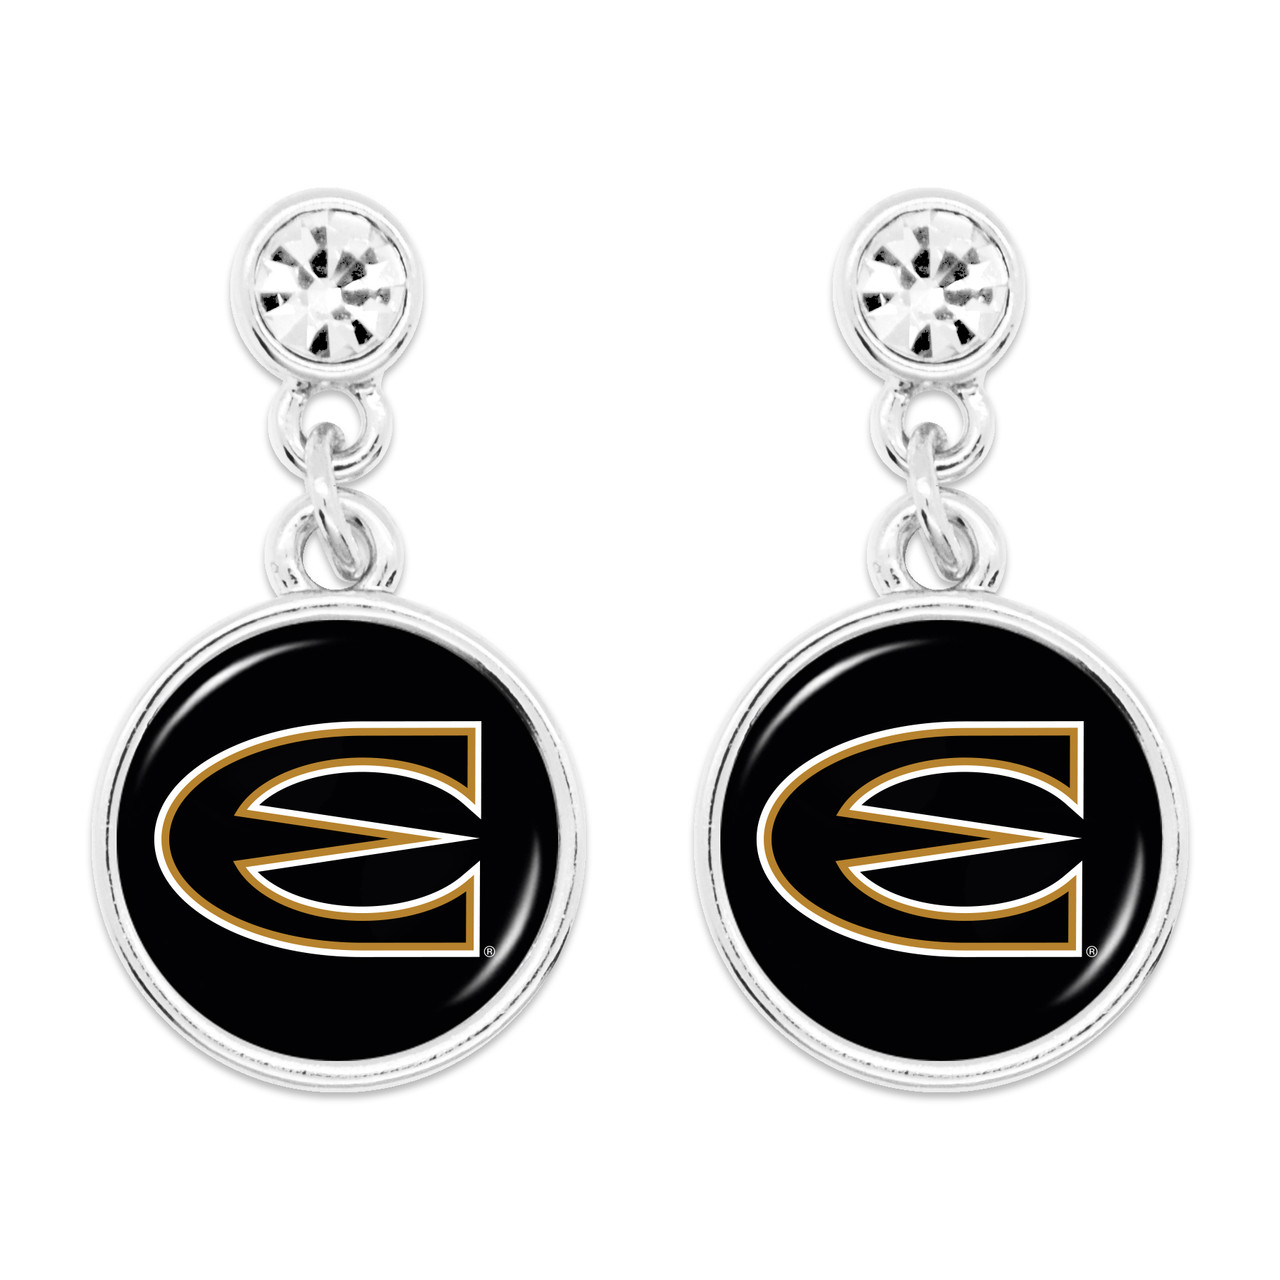 Emporia State Hornets - Silver Lydia Earrings